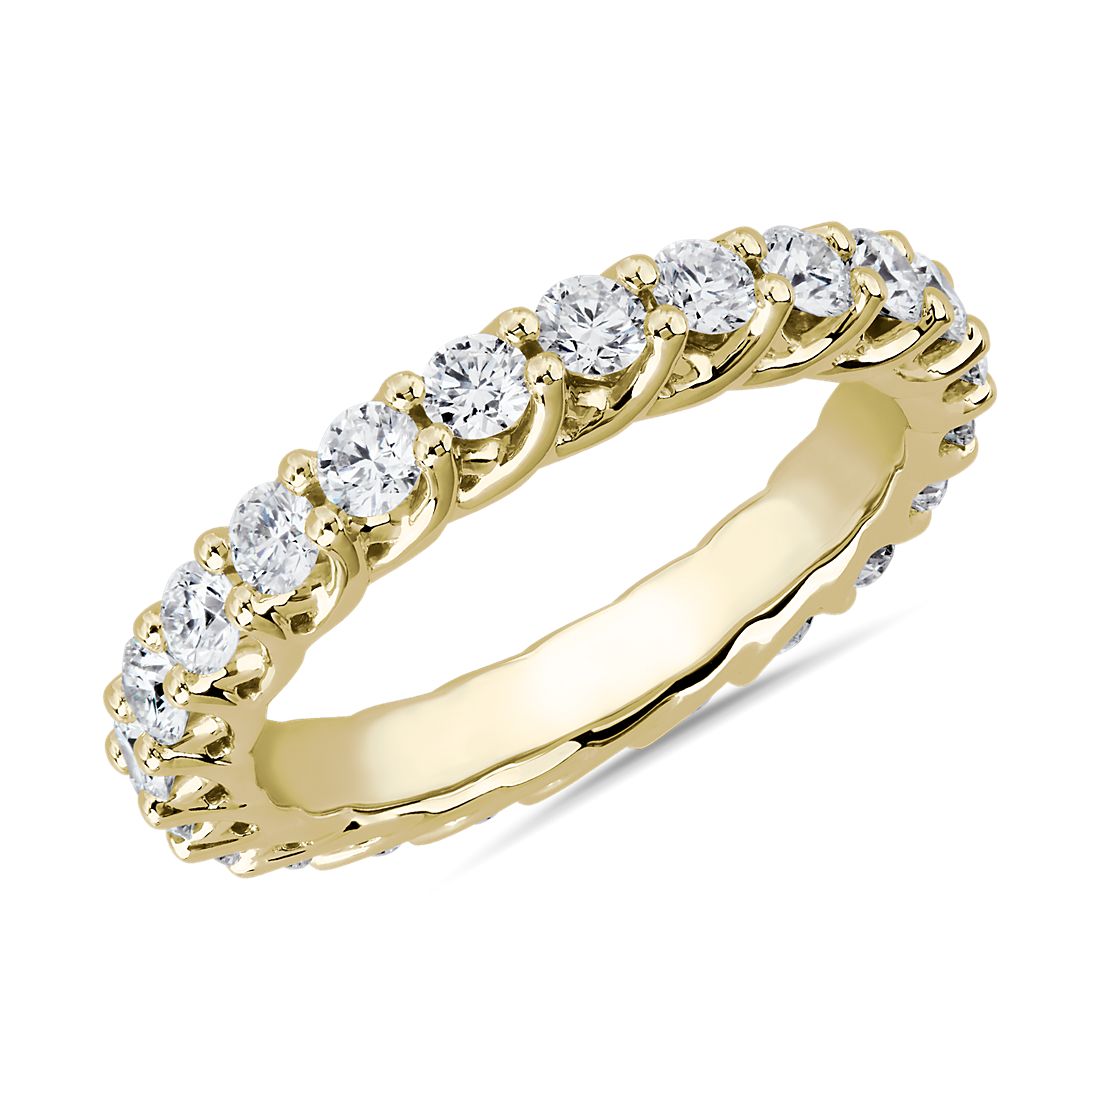 Tessere Weave Diamond Eternity Band in 14k Yellow Gold (1.34 ct. tw.)